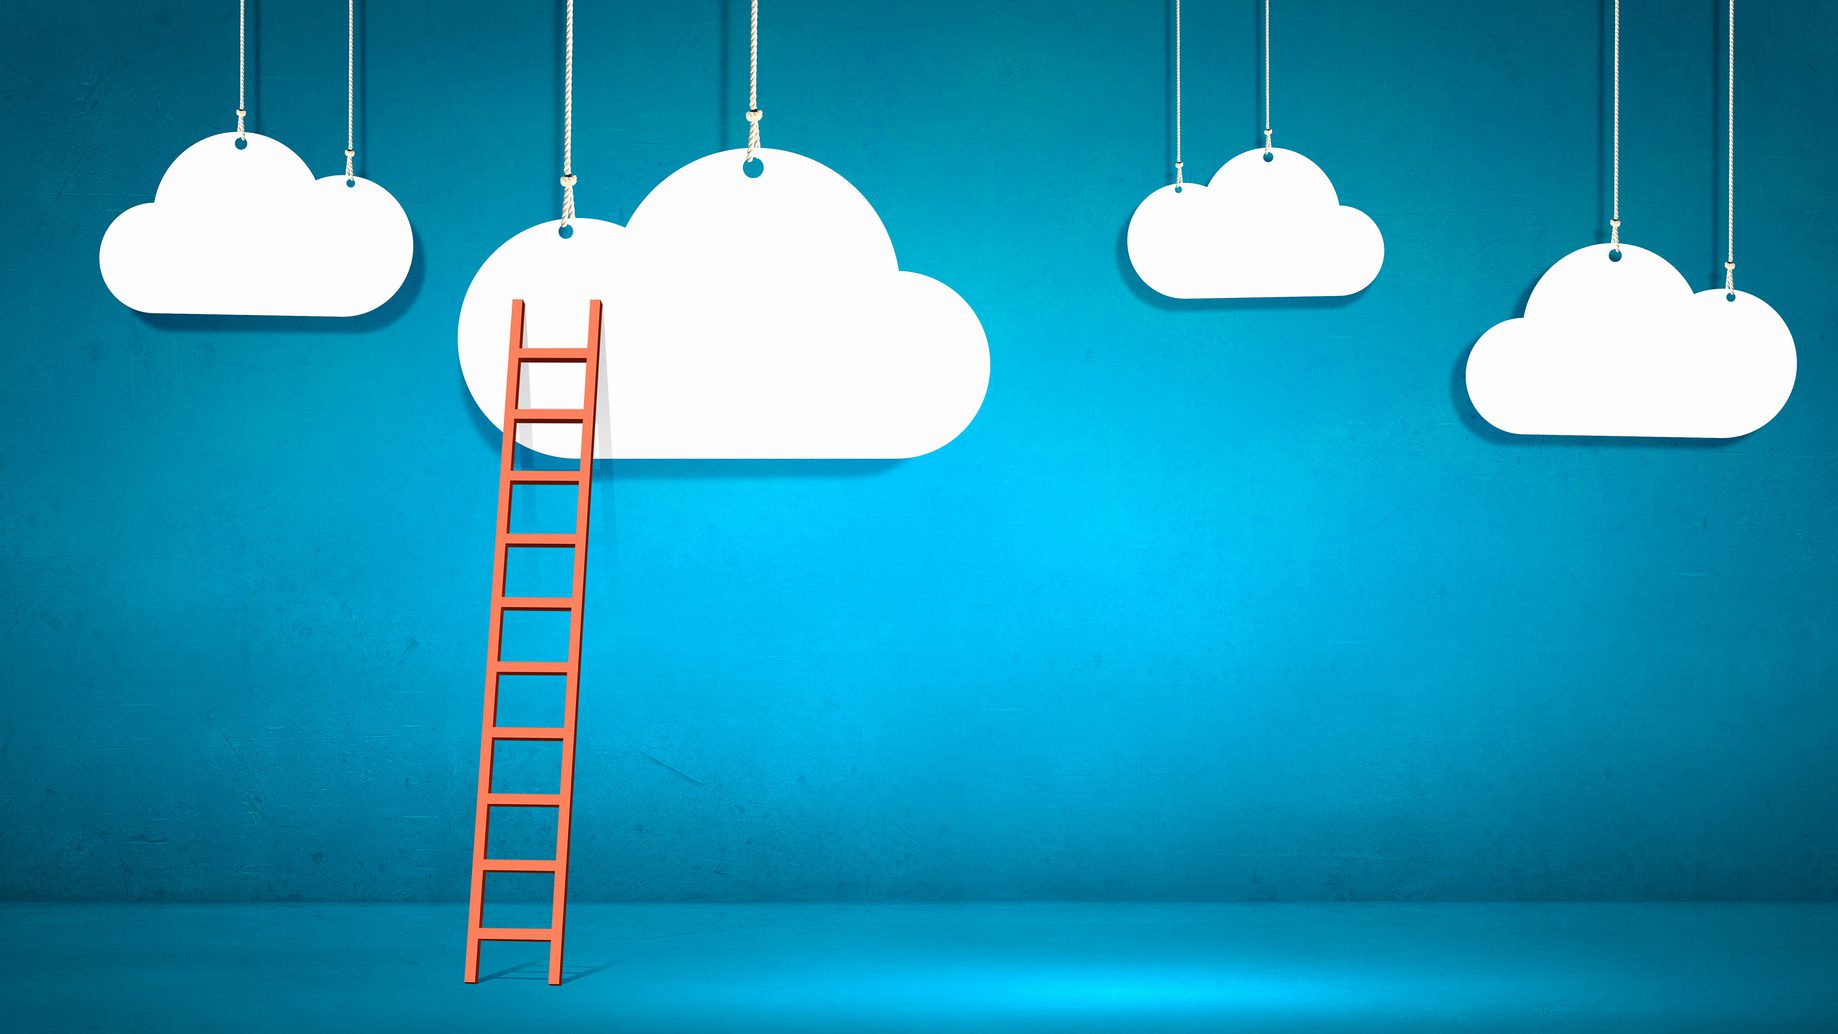 cloud computing challenges or opportunities